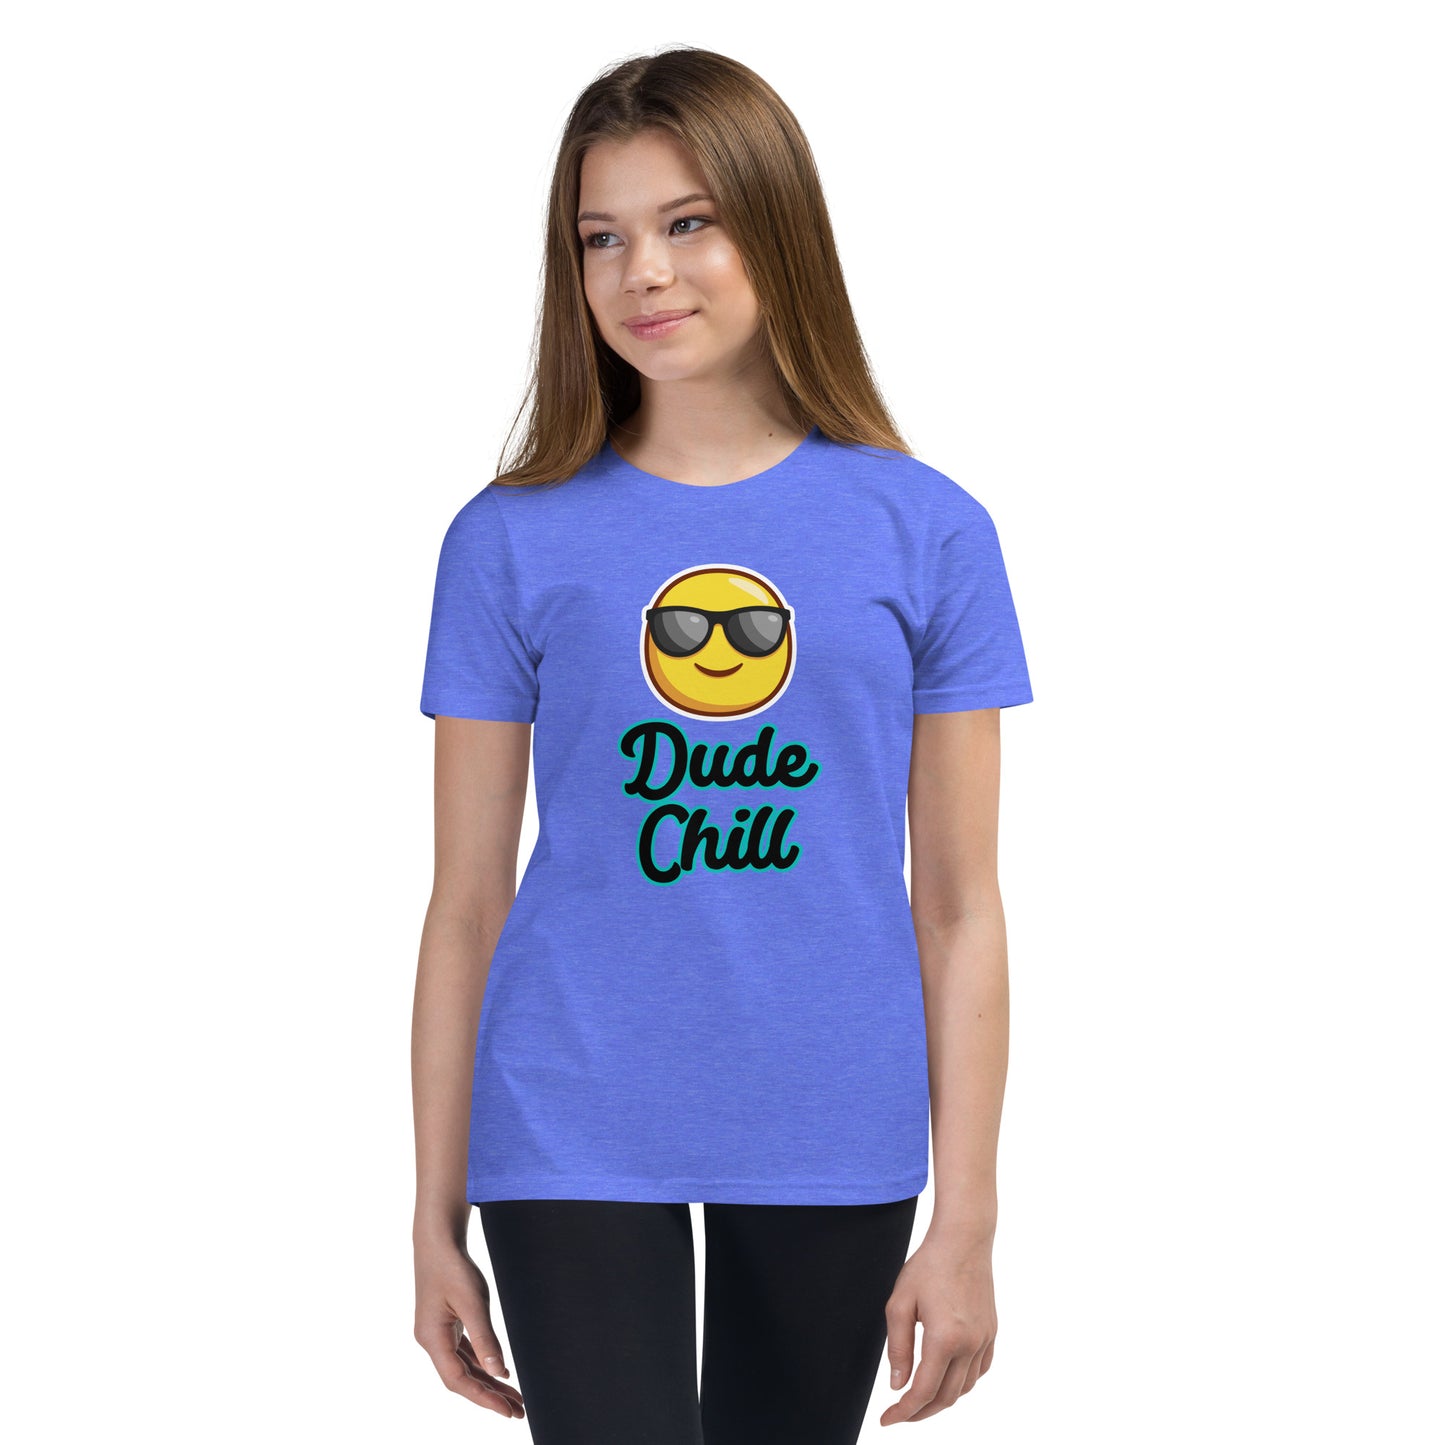 Dude Chill Youth Short Sleeve T-Shirt